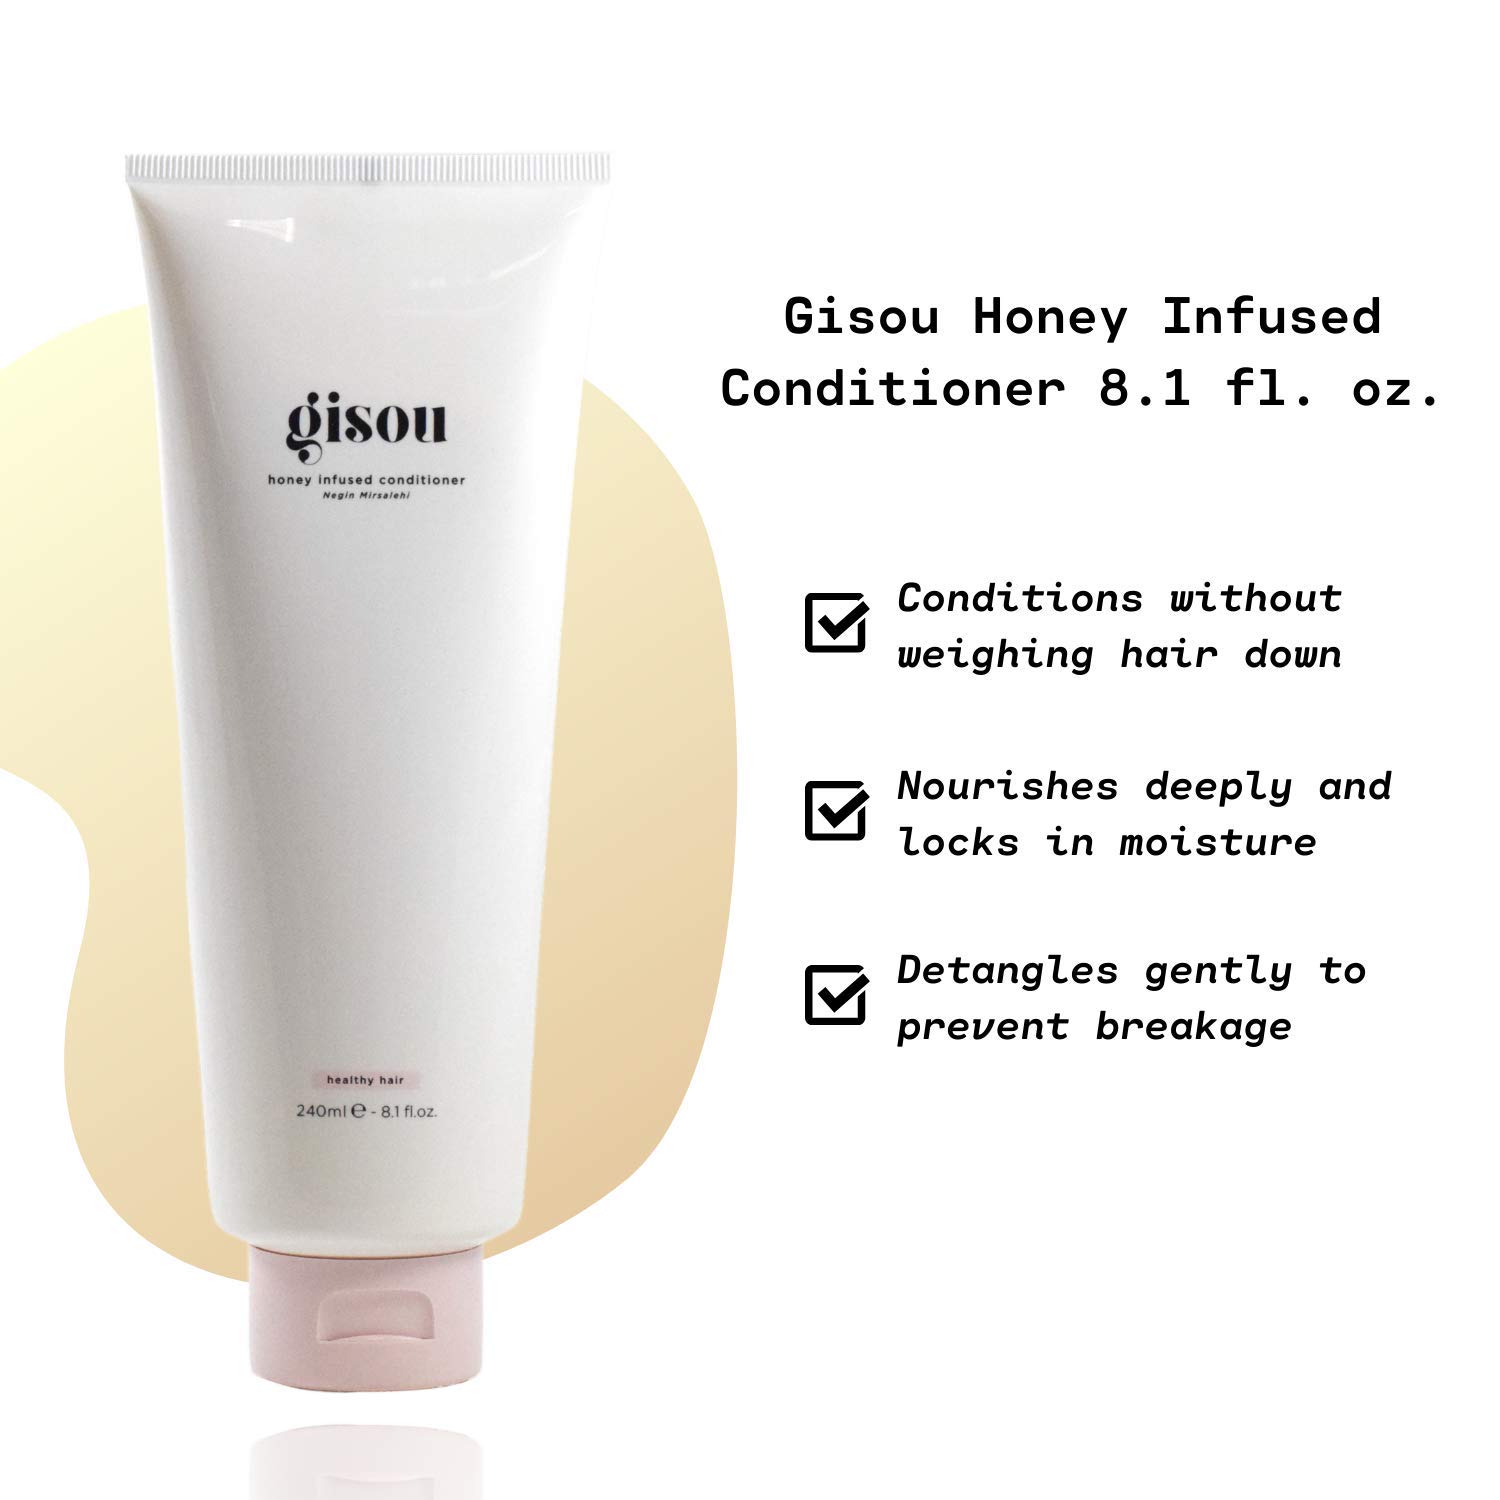 Gisou Honey Infused Hair Conditioner - 240 ml